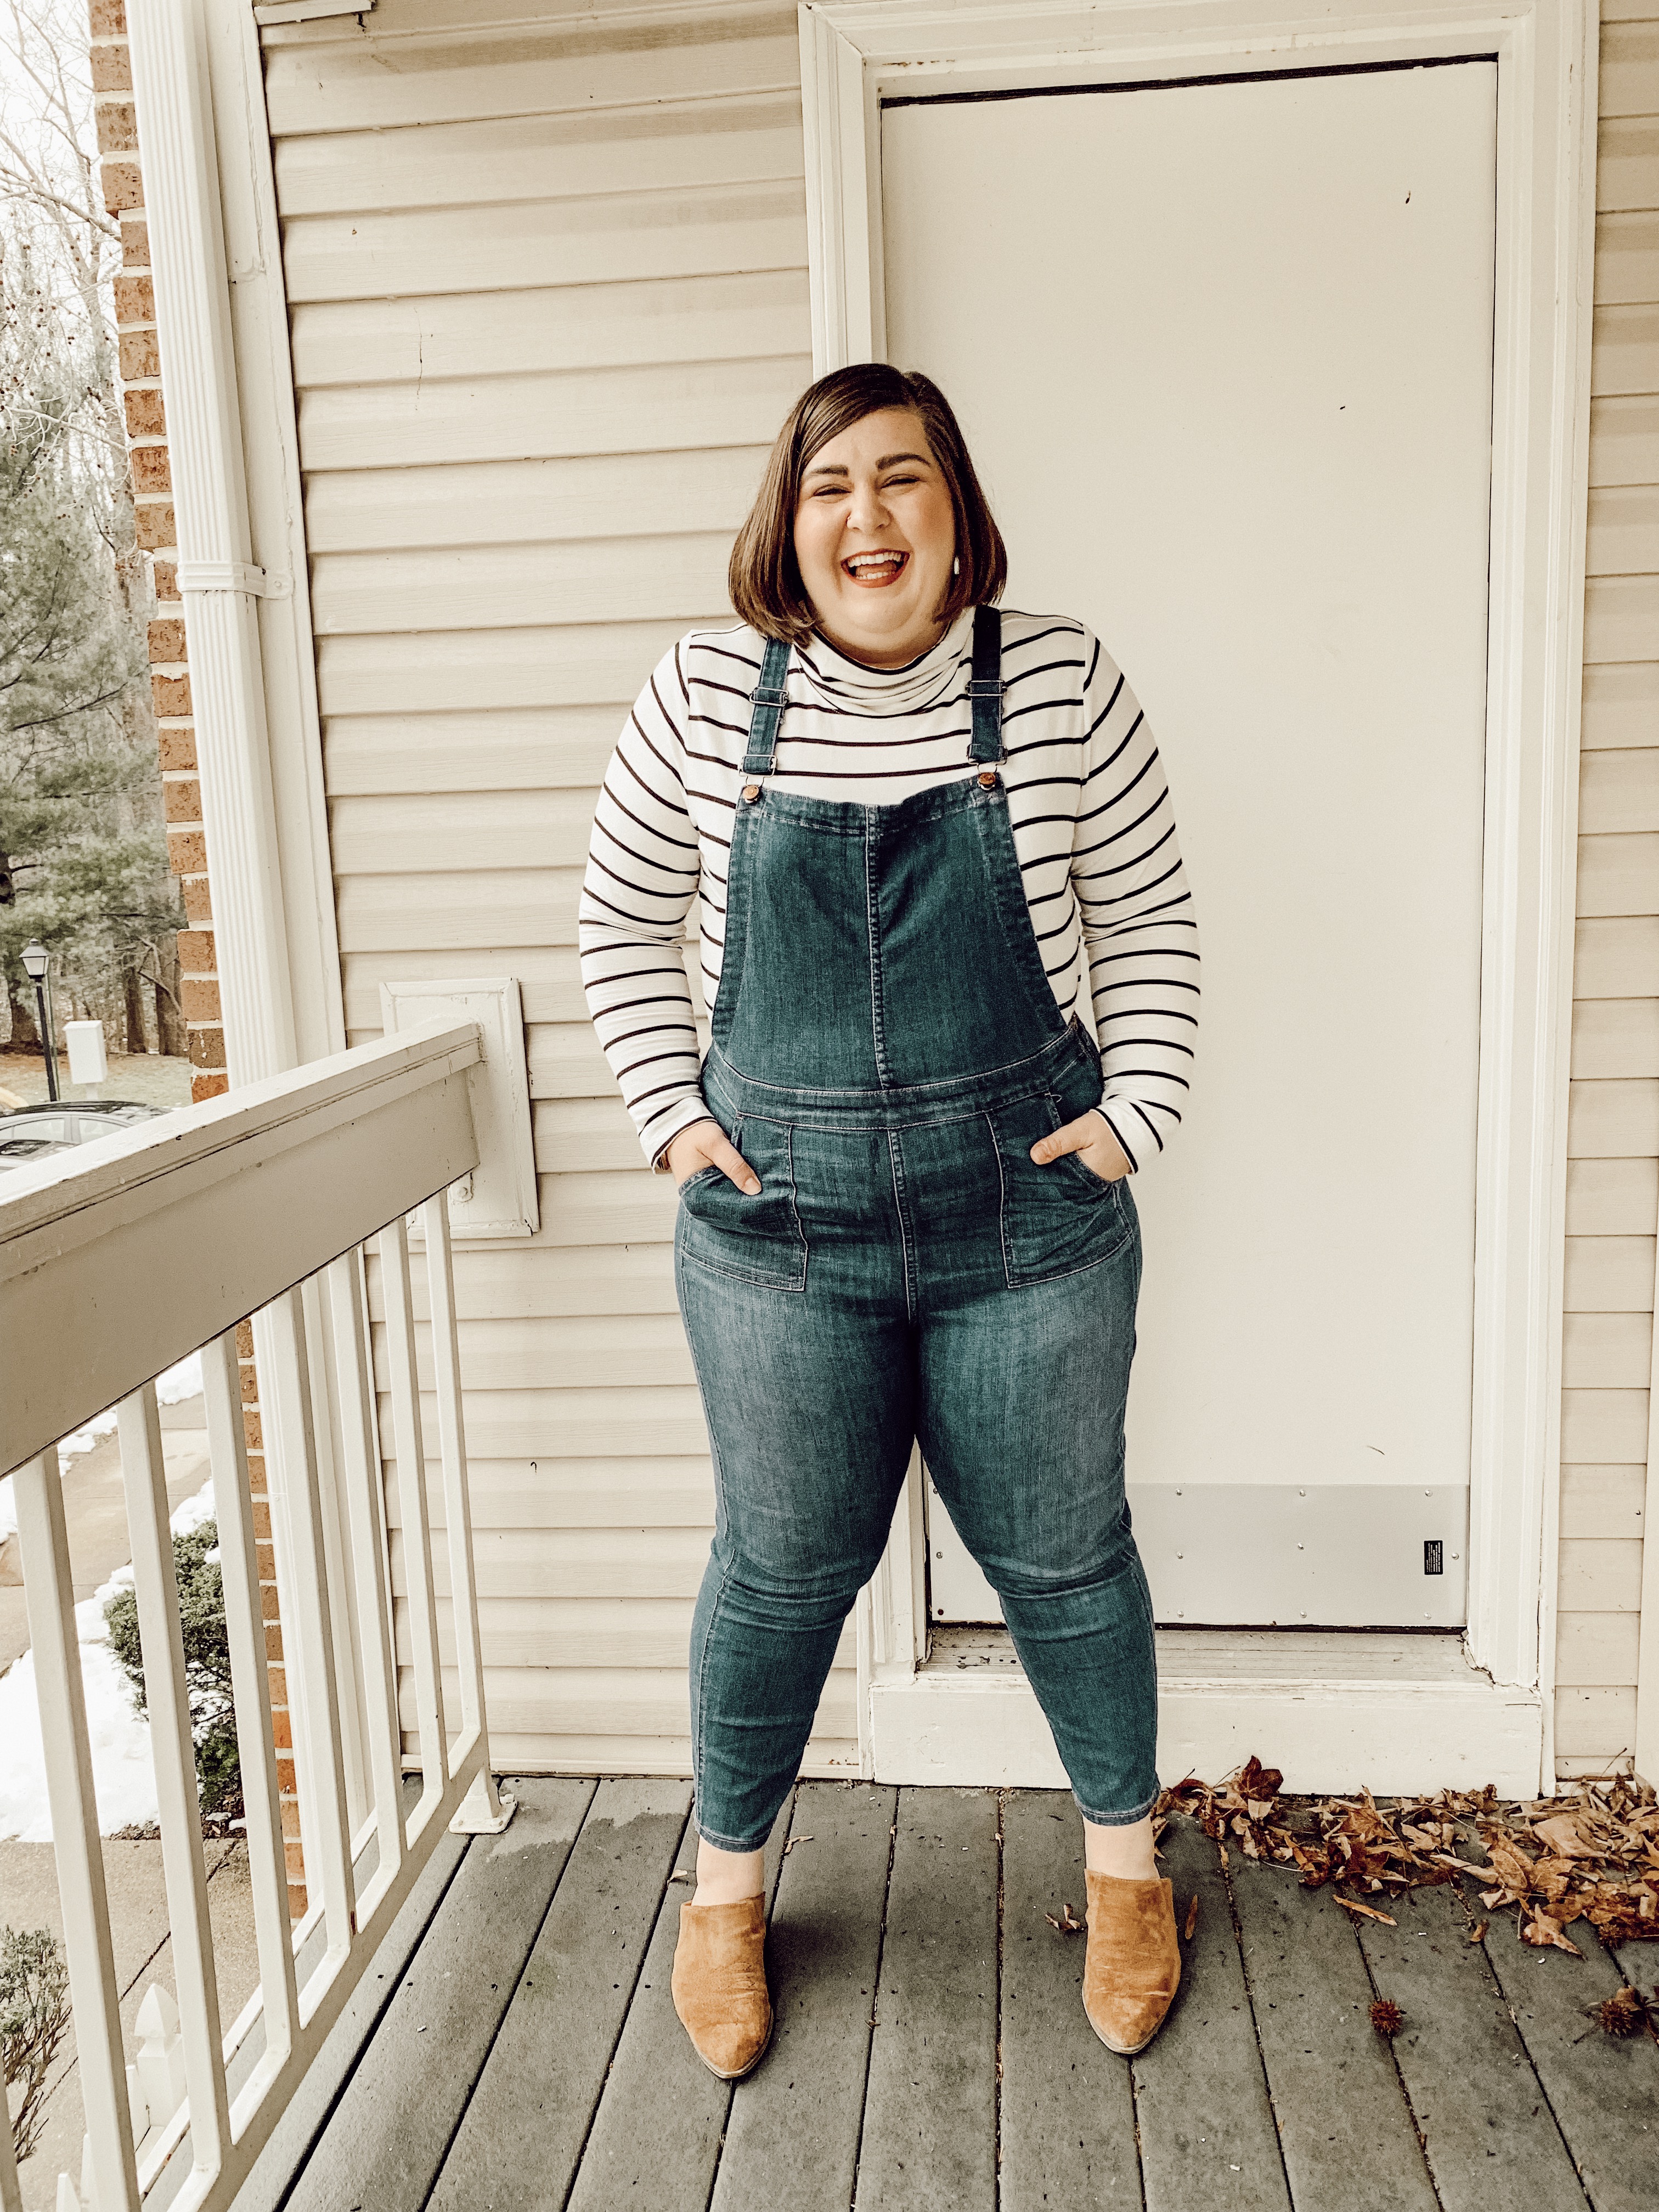 8 Ways to Style Overalls